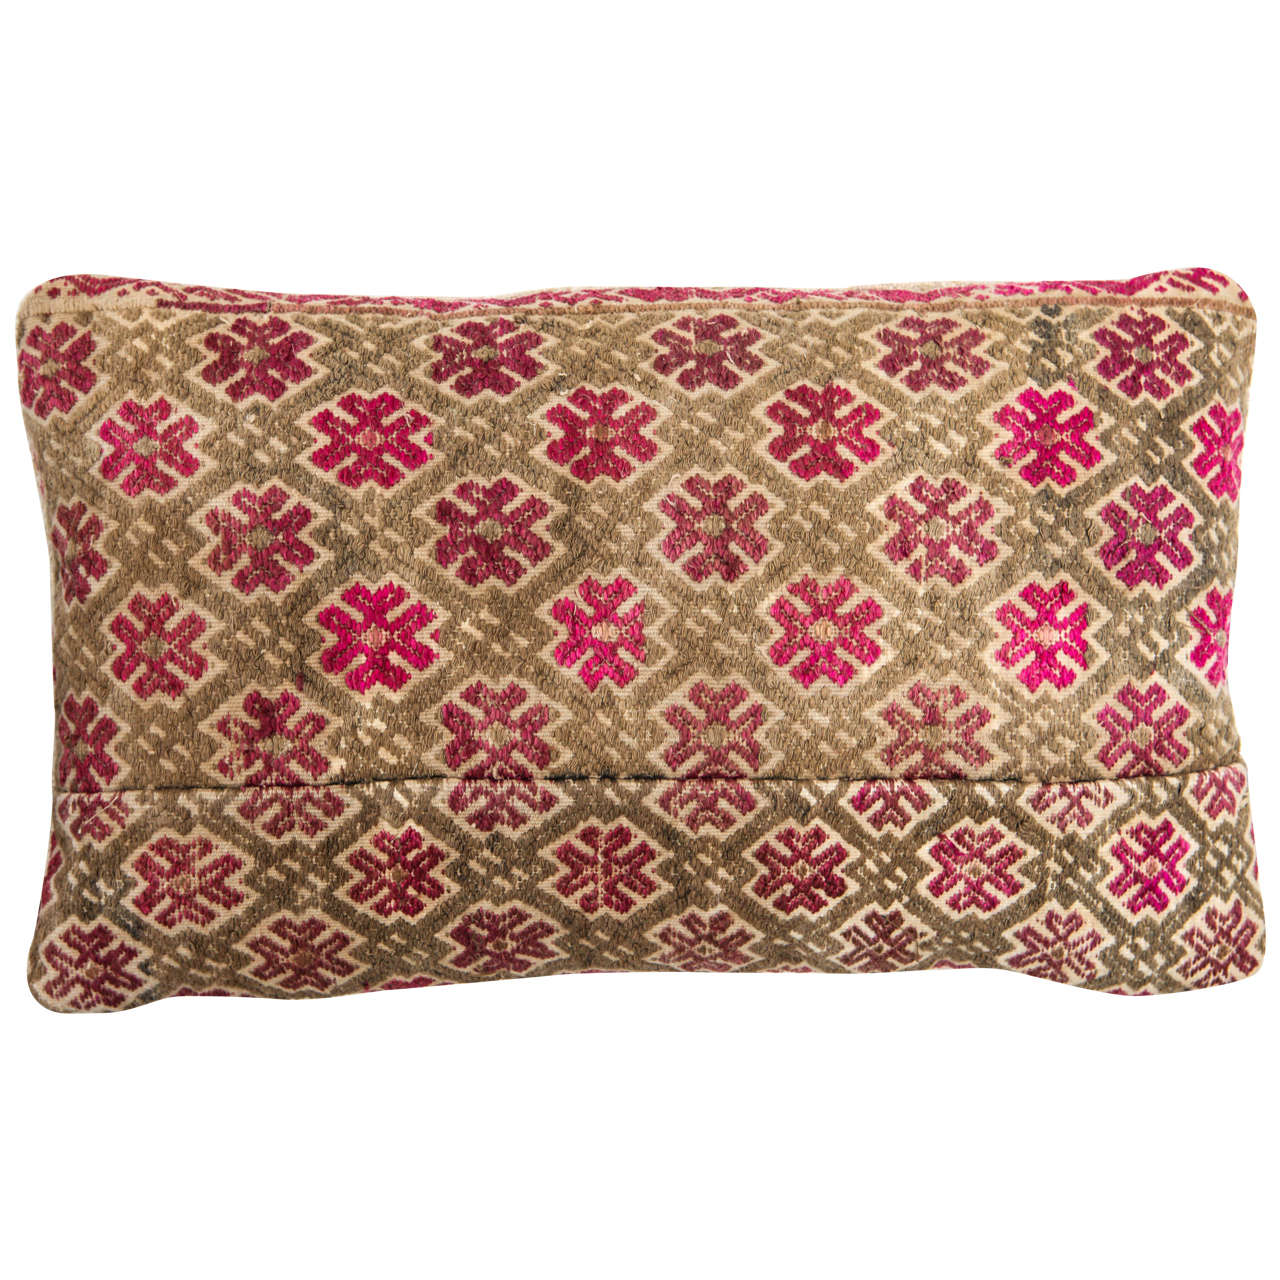 Chinese Hill Tribe Brocade Pillow